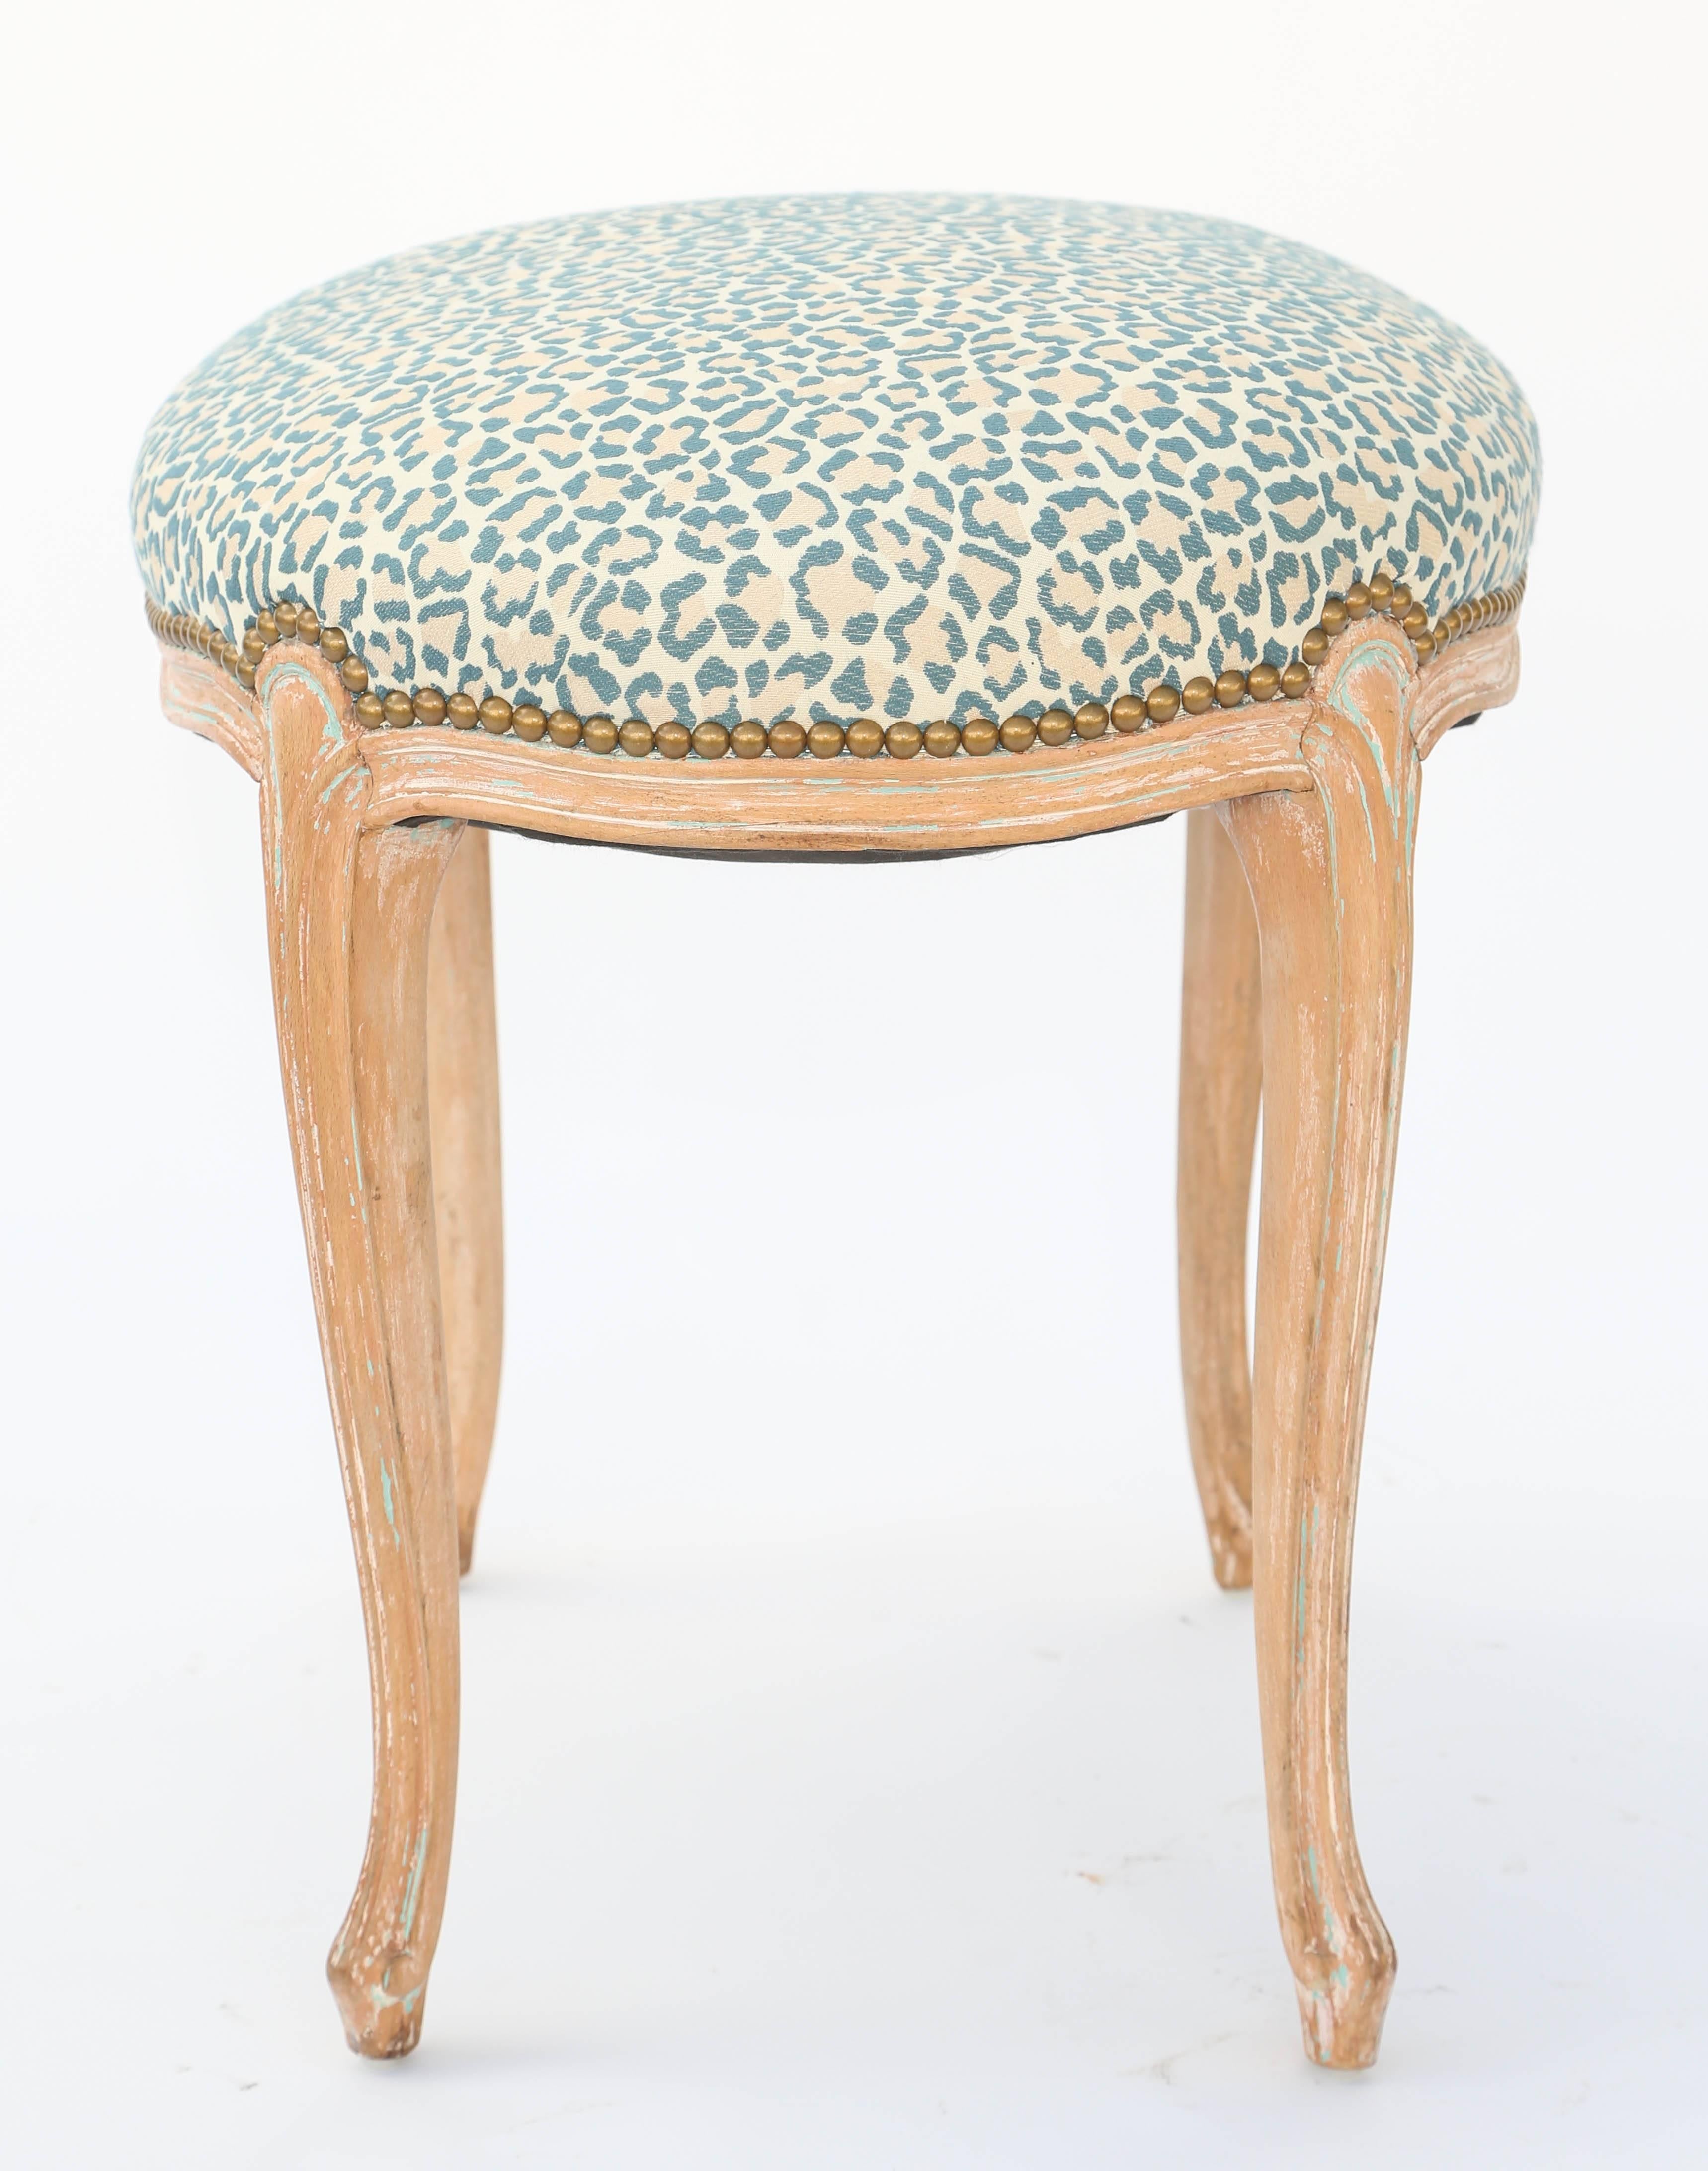 Amsterdam School Oval Louis XV Stool with Pickled Finish